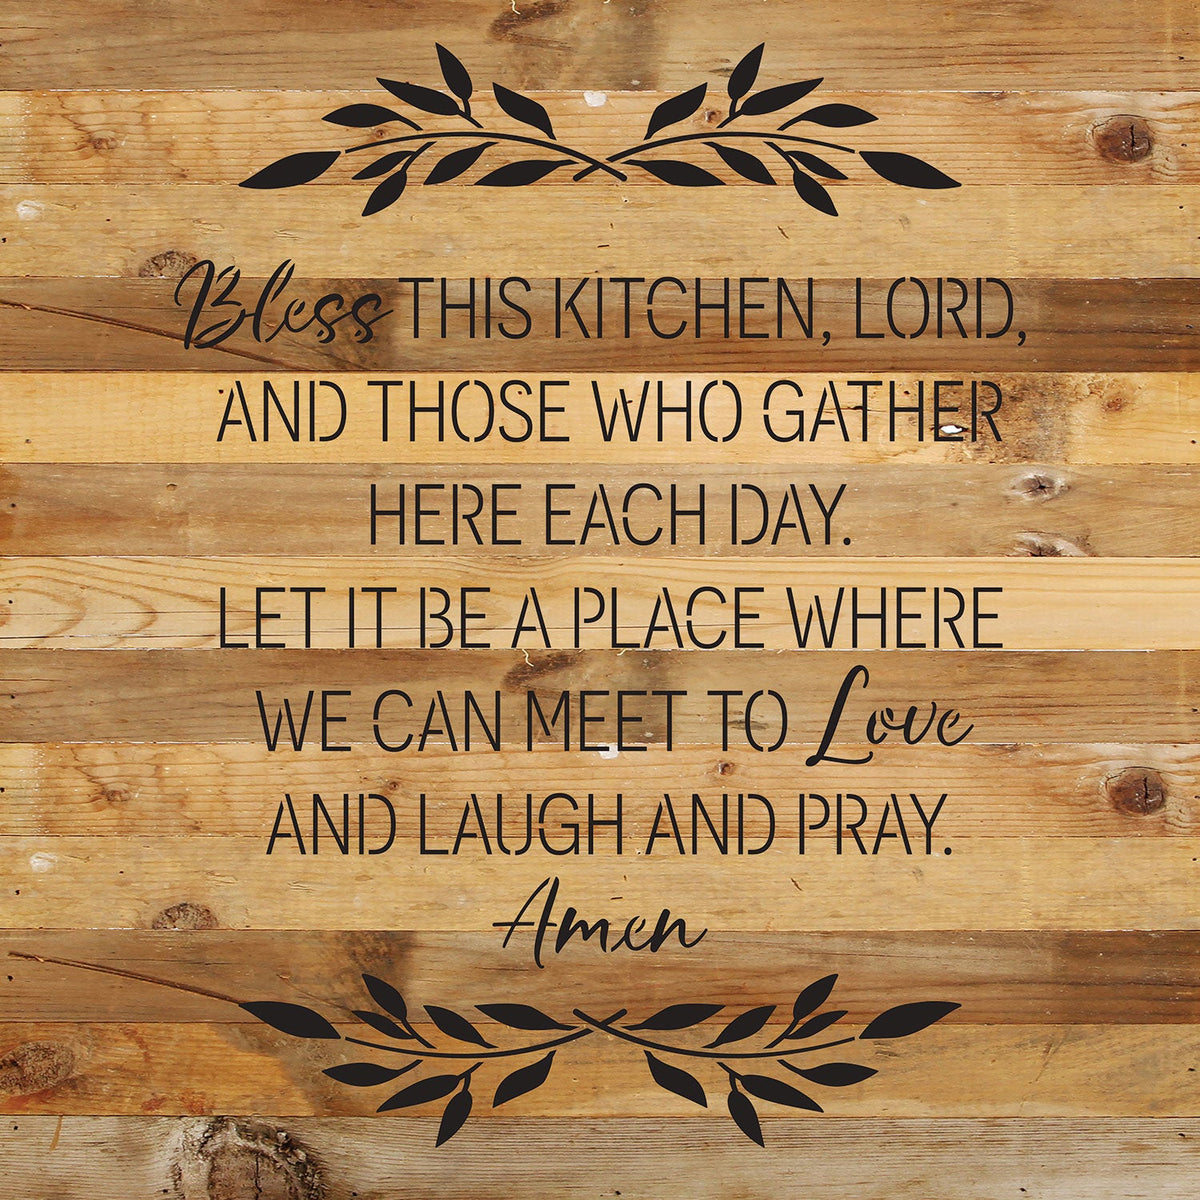 Bless this kitchen, Lord, and those who gather here each day. Let it be a place where we can meet to love and laugh and pray. Amen / 14x14 Reclaimed Wood Wall Decor